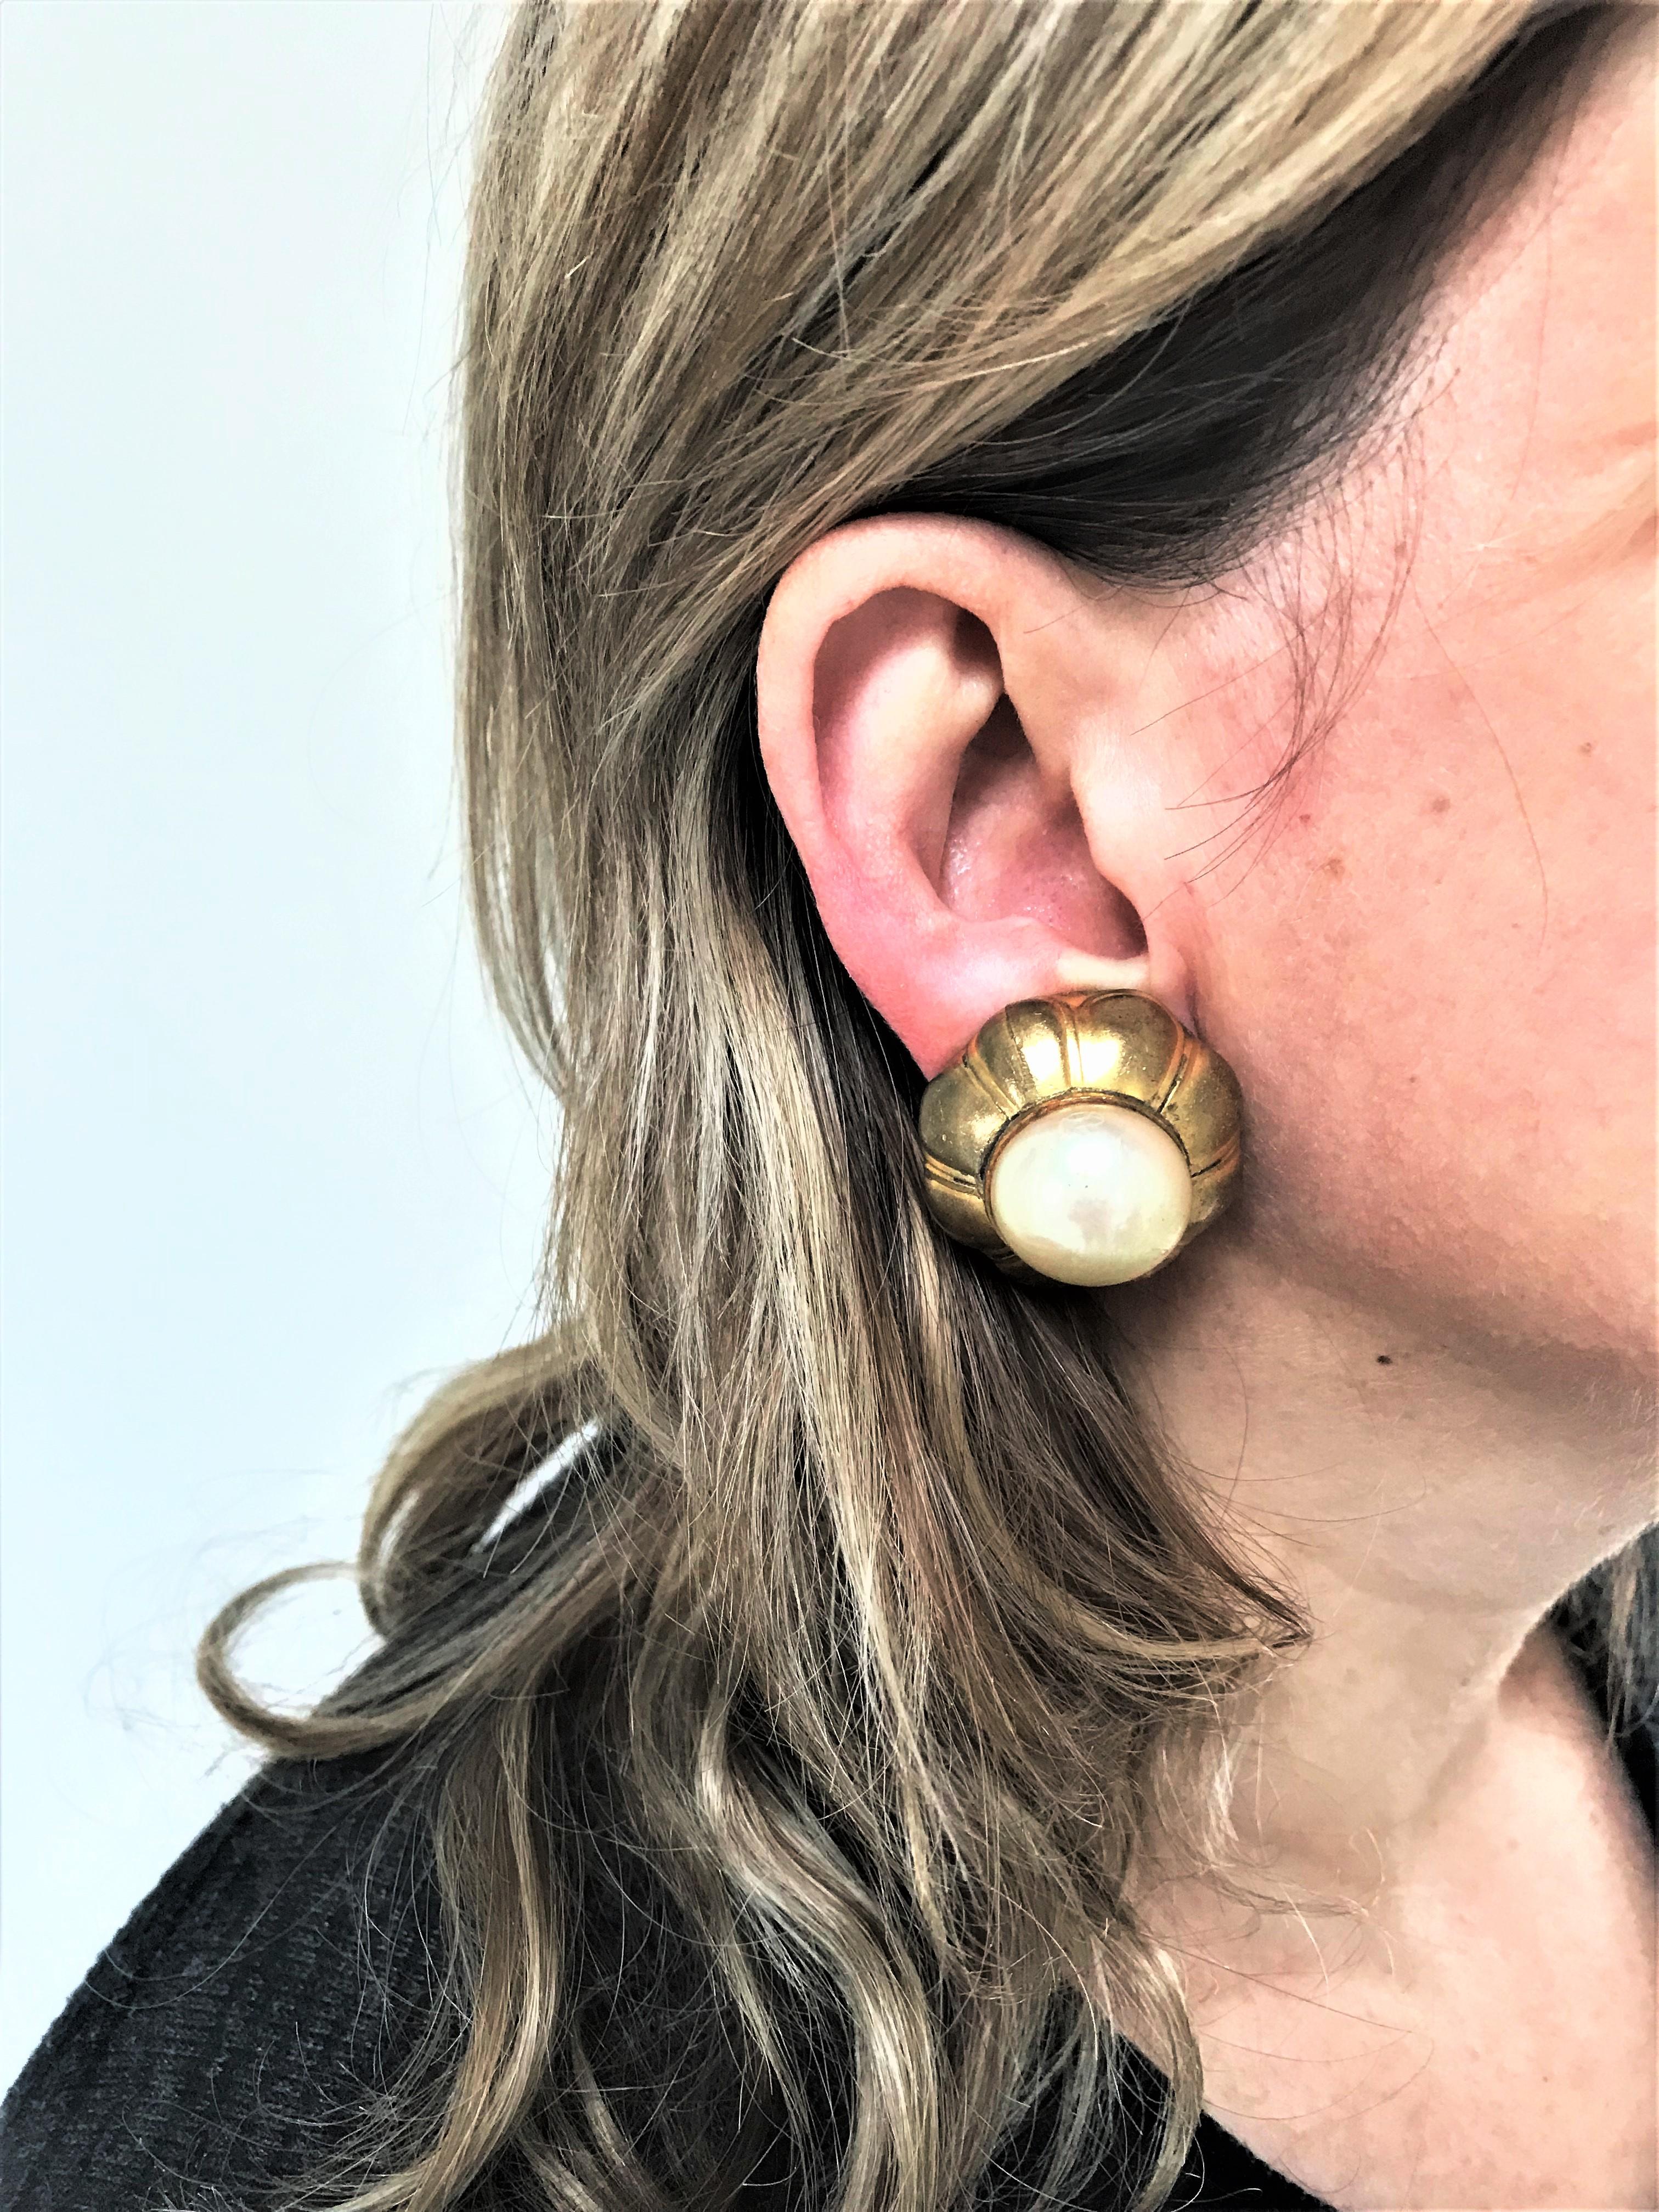 About
Very Vintage clip-on earring flower shaped with a large round baroque pearl from the early 1970s, unsigned CHANEL. 
Measurements:
Diameter 1.18 inches (3,5 cm)
Deep       0.71 inches (1,8 cm) 
Features:
--Barock Pearl 0,71 inches ( 1,80 cm) in